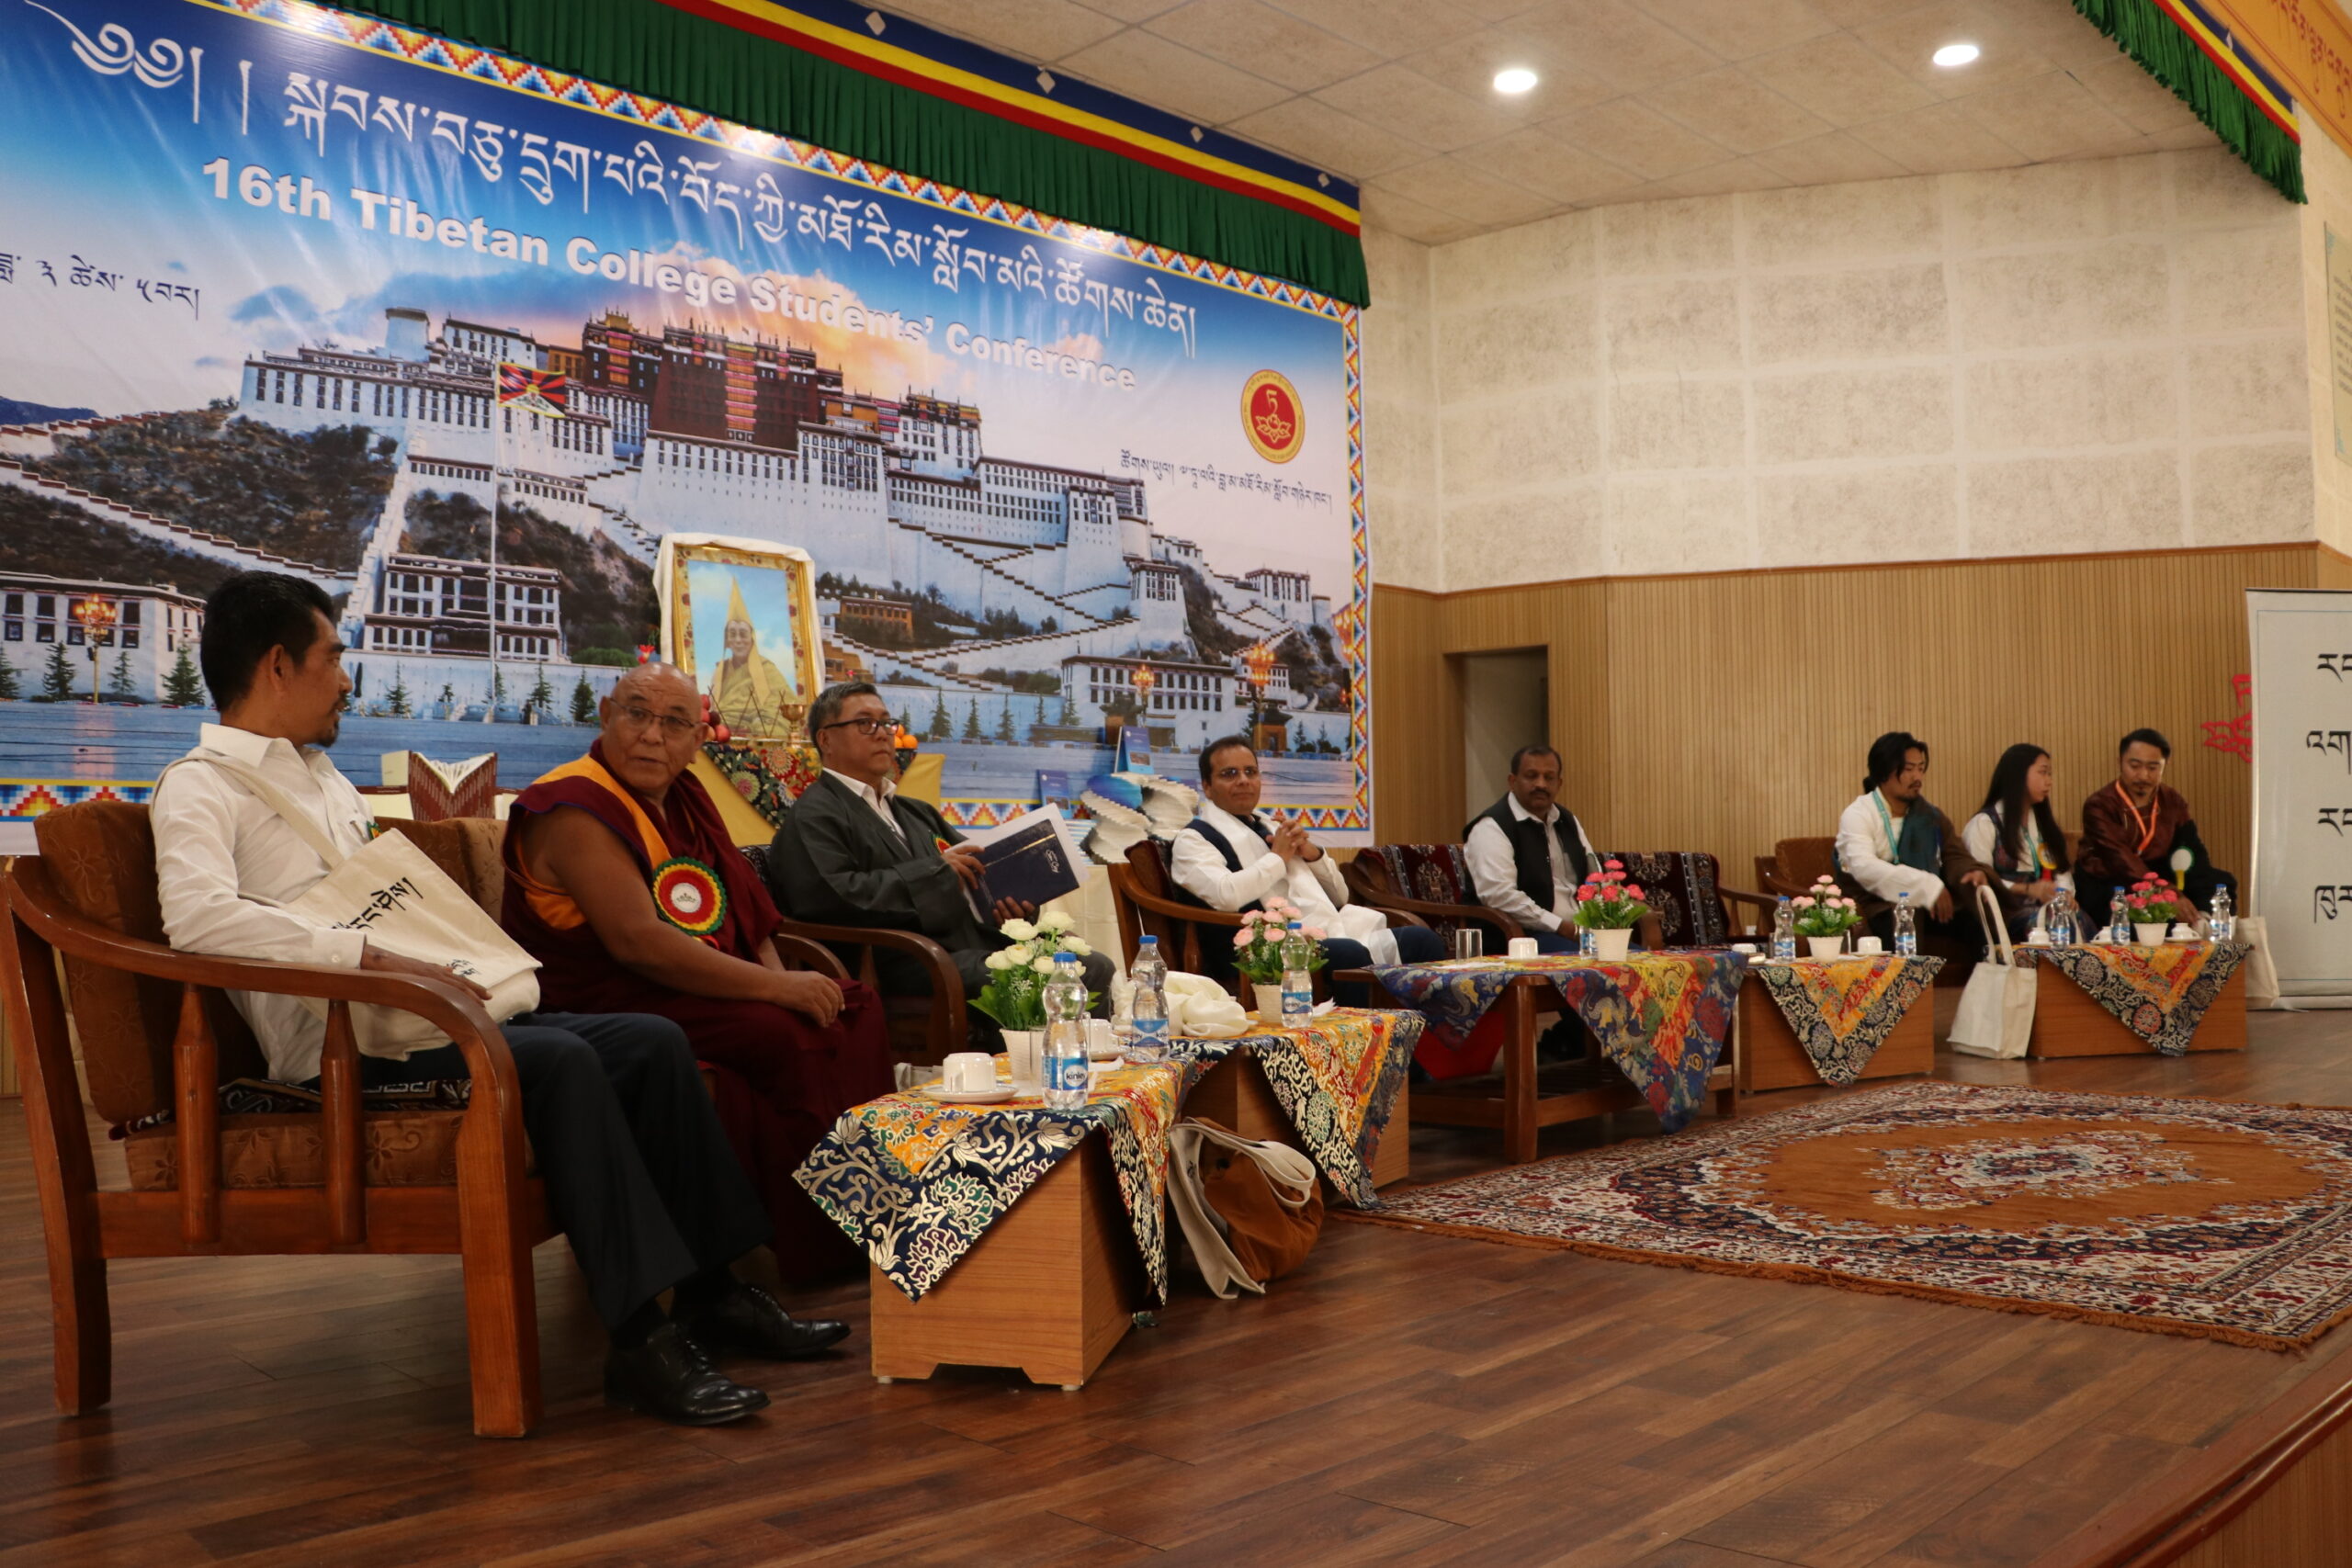 Opening Ceremony of the 16th Tibetan College Students' Conference at Dalai Lama Institute for Higher Education. 